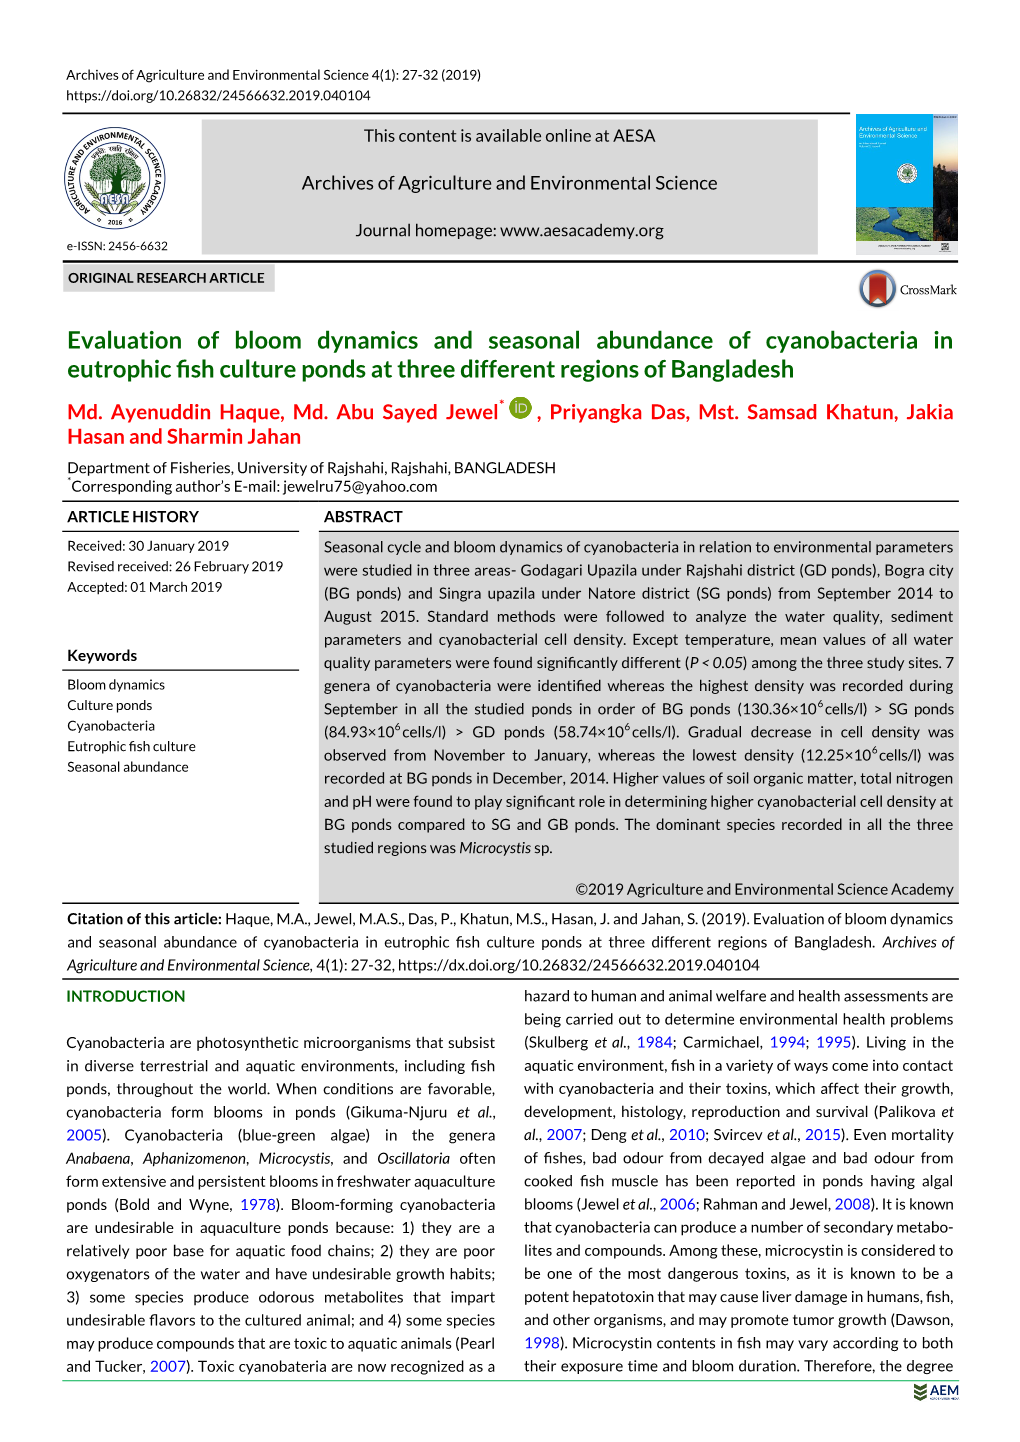 Evaluation of Bloom Dynamics and Seasonal Abundance of Cyanobacteria in Eutrophic Fish Culture Ponds at Three Different Regions of Bangladesh Md